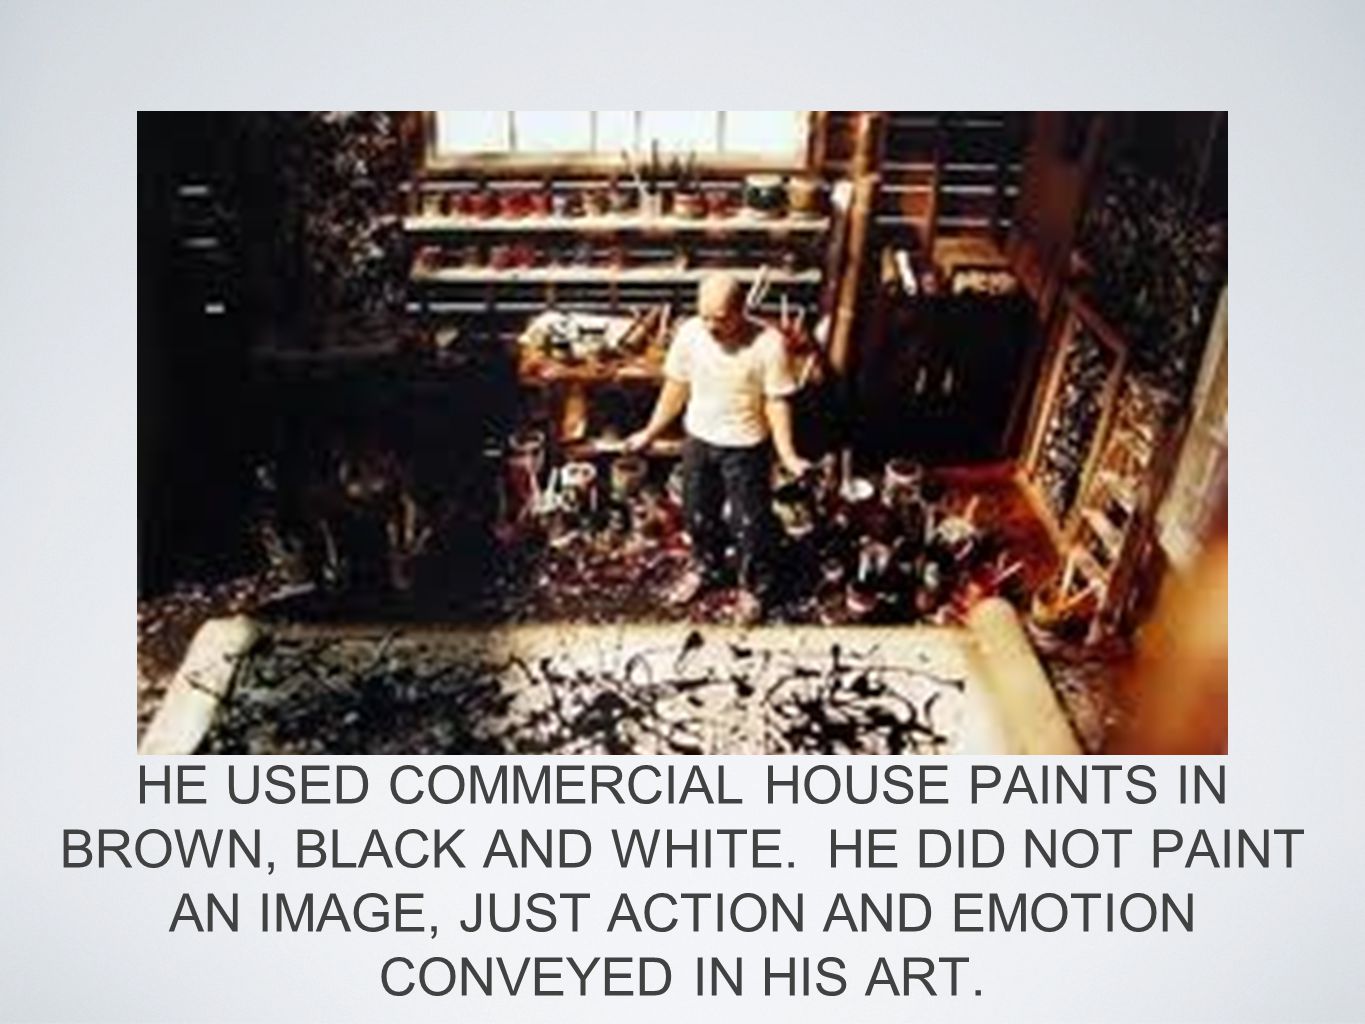 HE USED COMMERCIAL HOUSE PAINTS IN BROWN, BLACK AND WHITE.